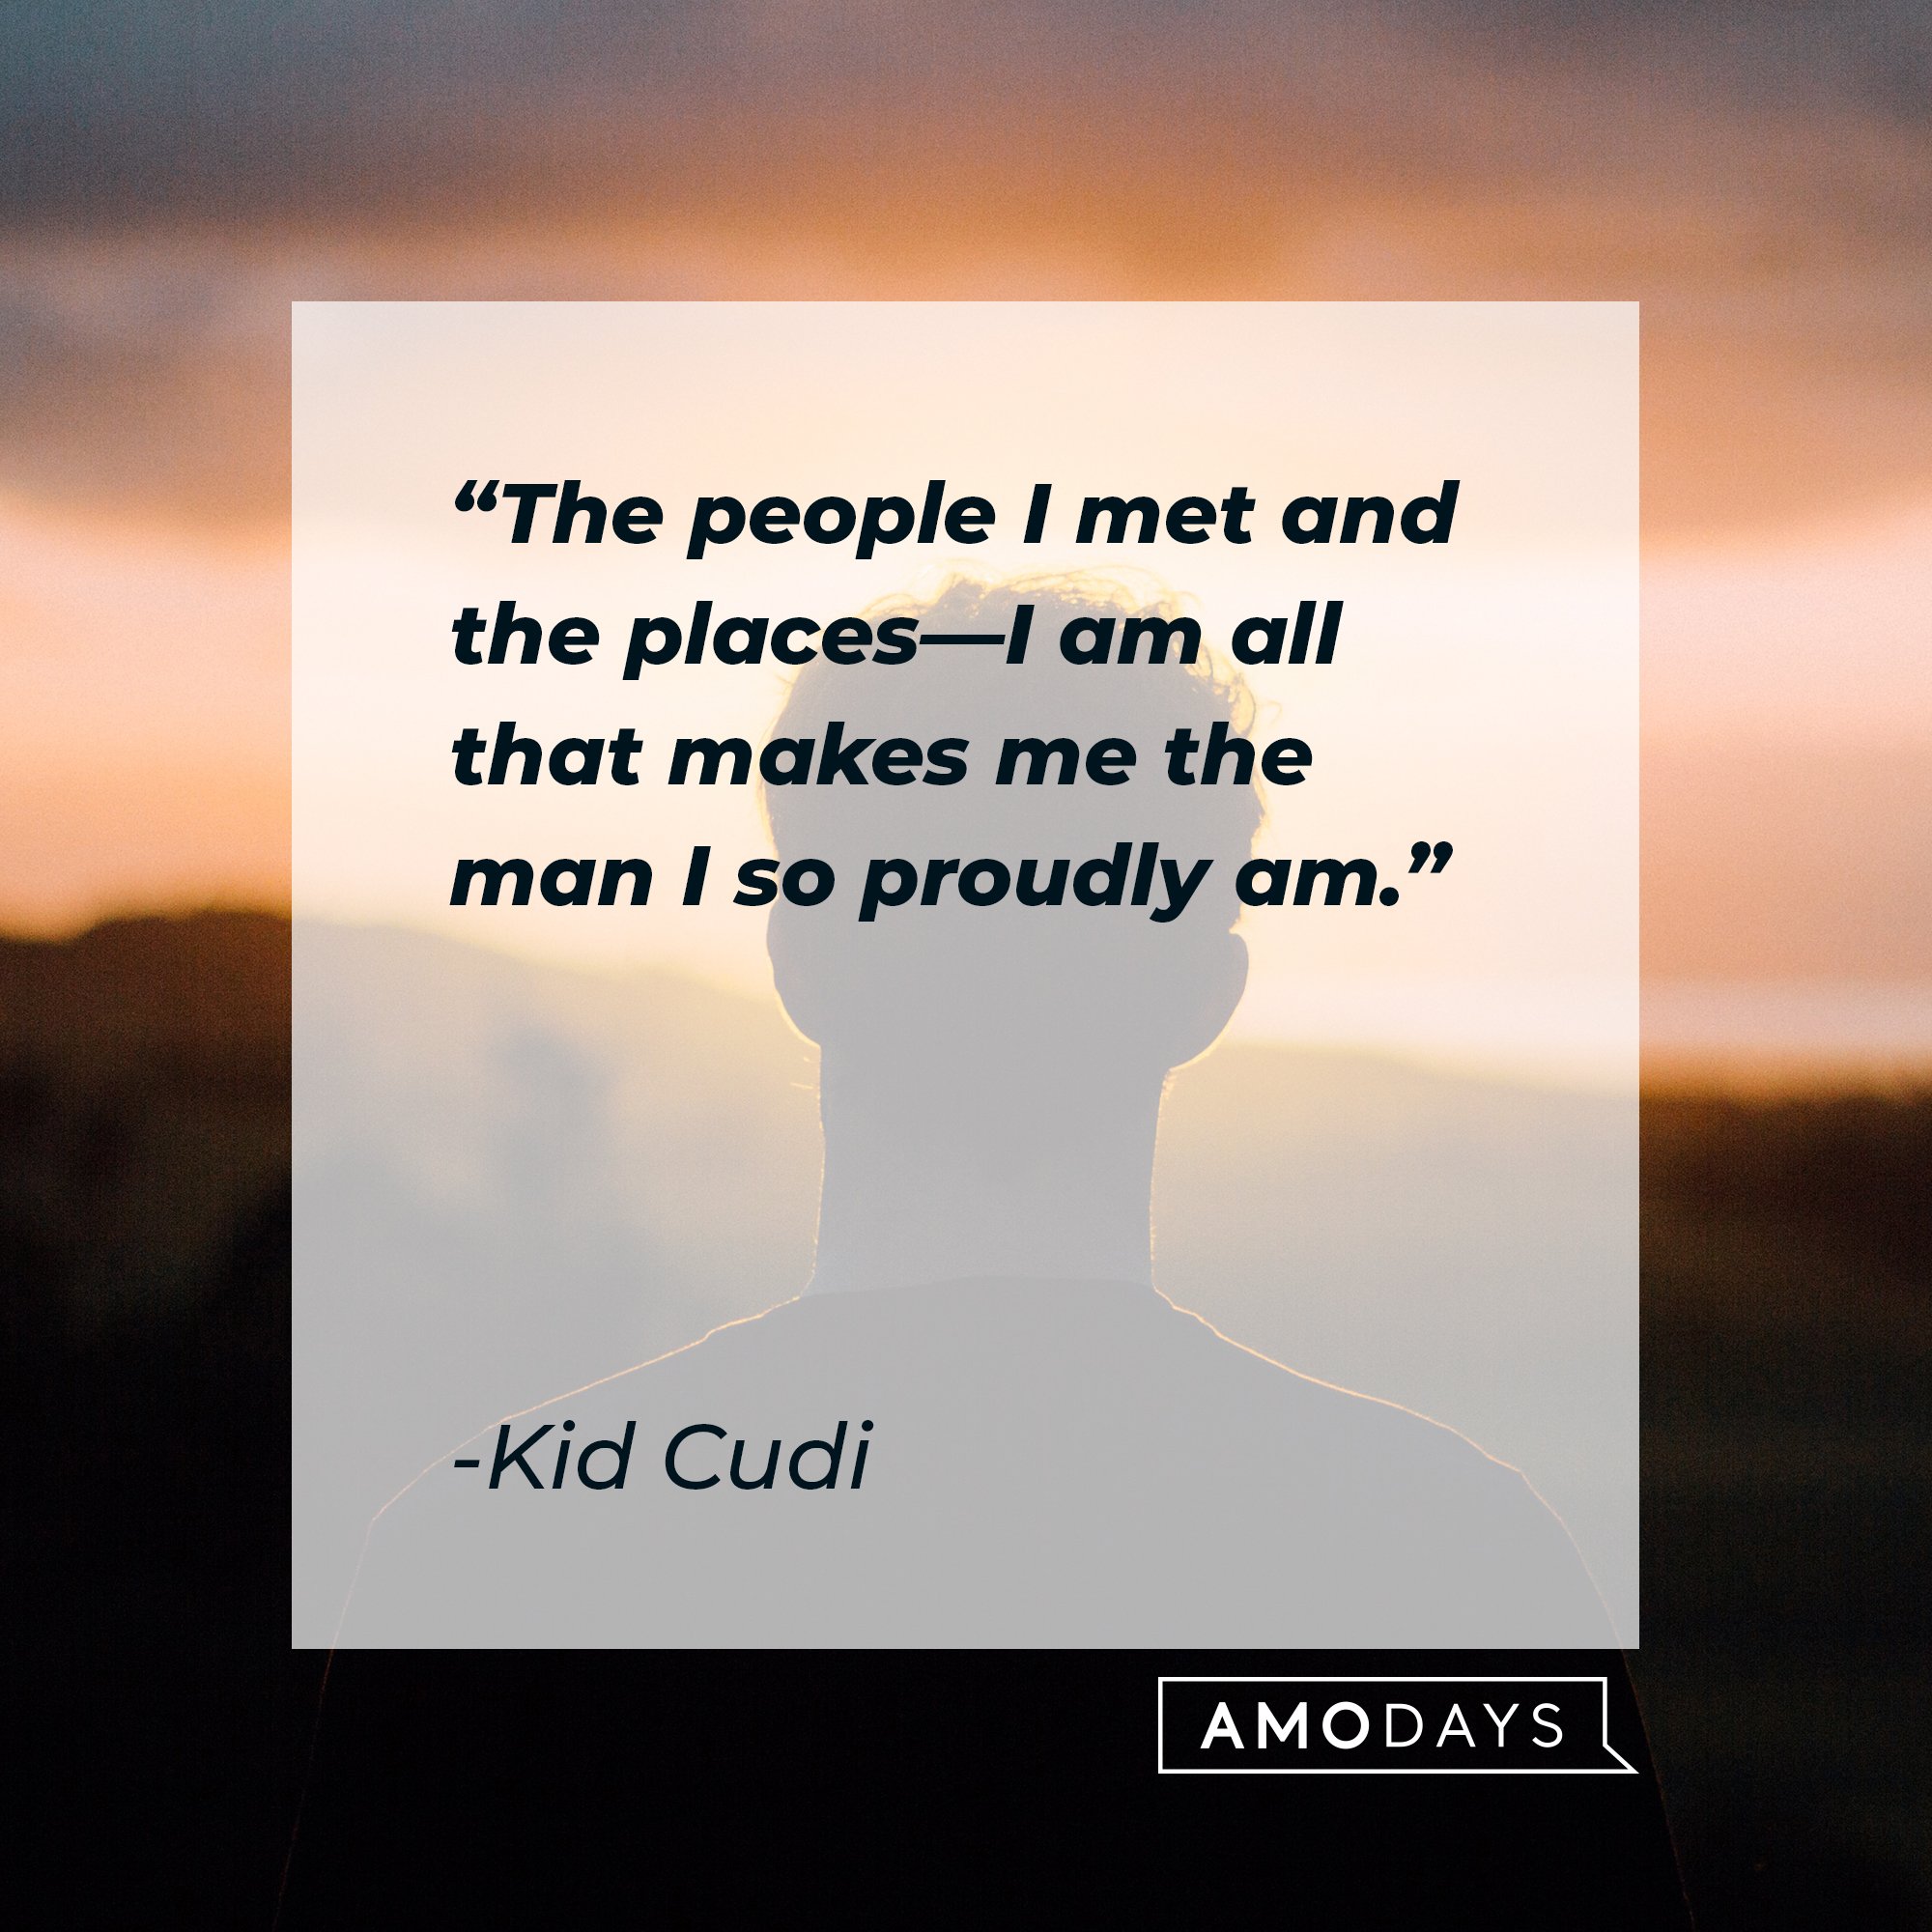 Kid Cudi’s quote: “The people I met and the places—I am all that makes me the man I so proudly am.” | Image: AmoDays 